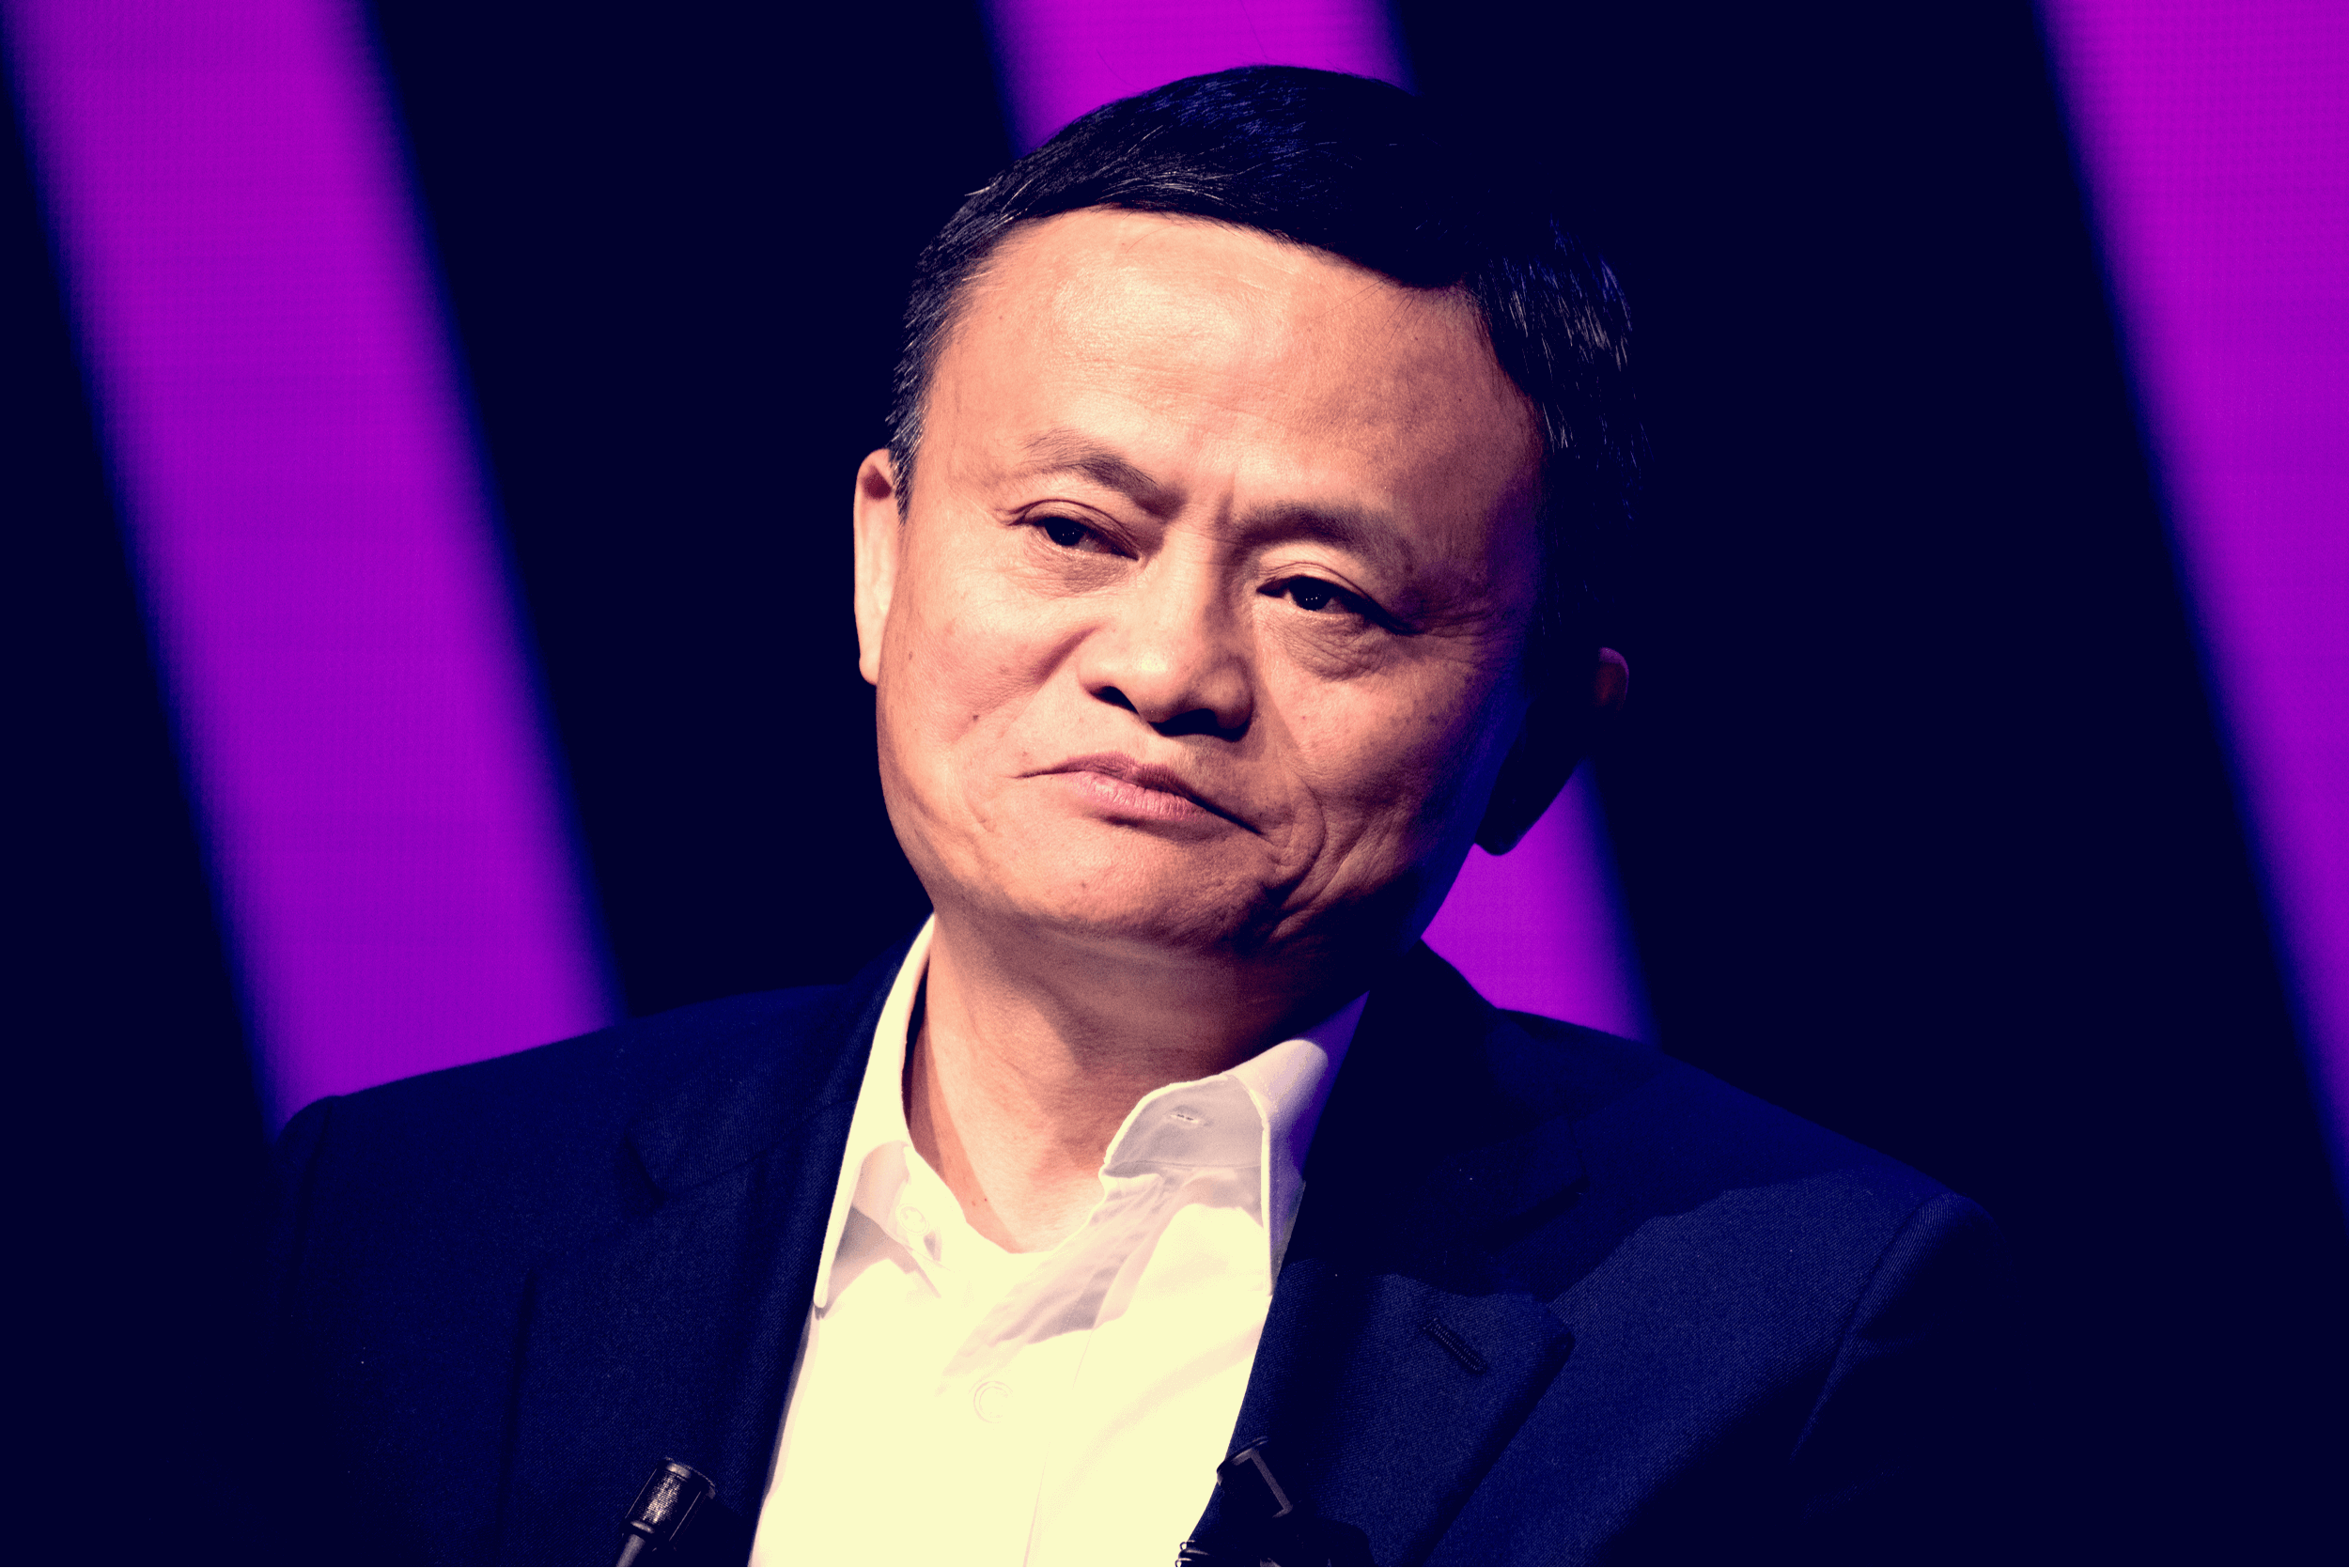 The chinese businessman and CEO of Alibaba group Jack Ma in congress at VIVA Technology (Vivatech) the world's rendezvous for startup and leaders.